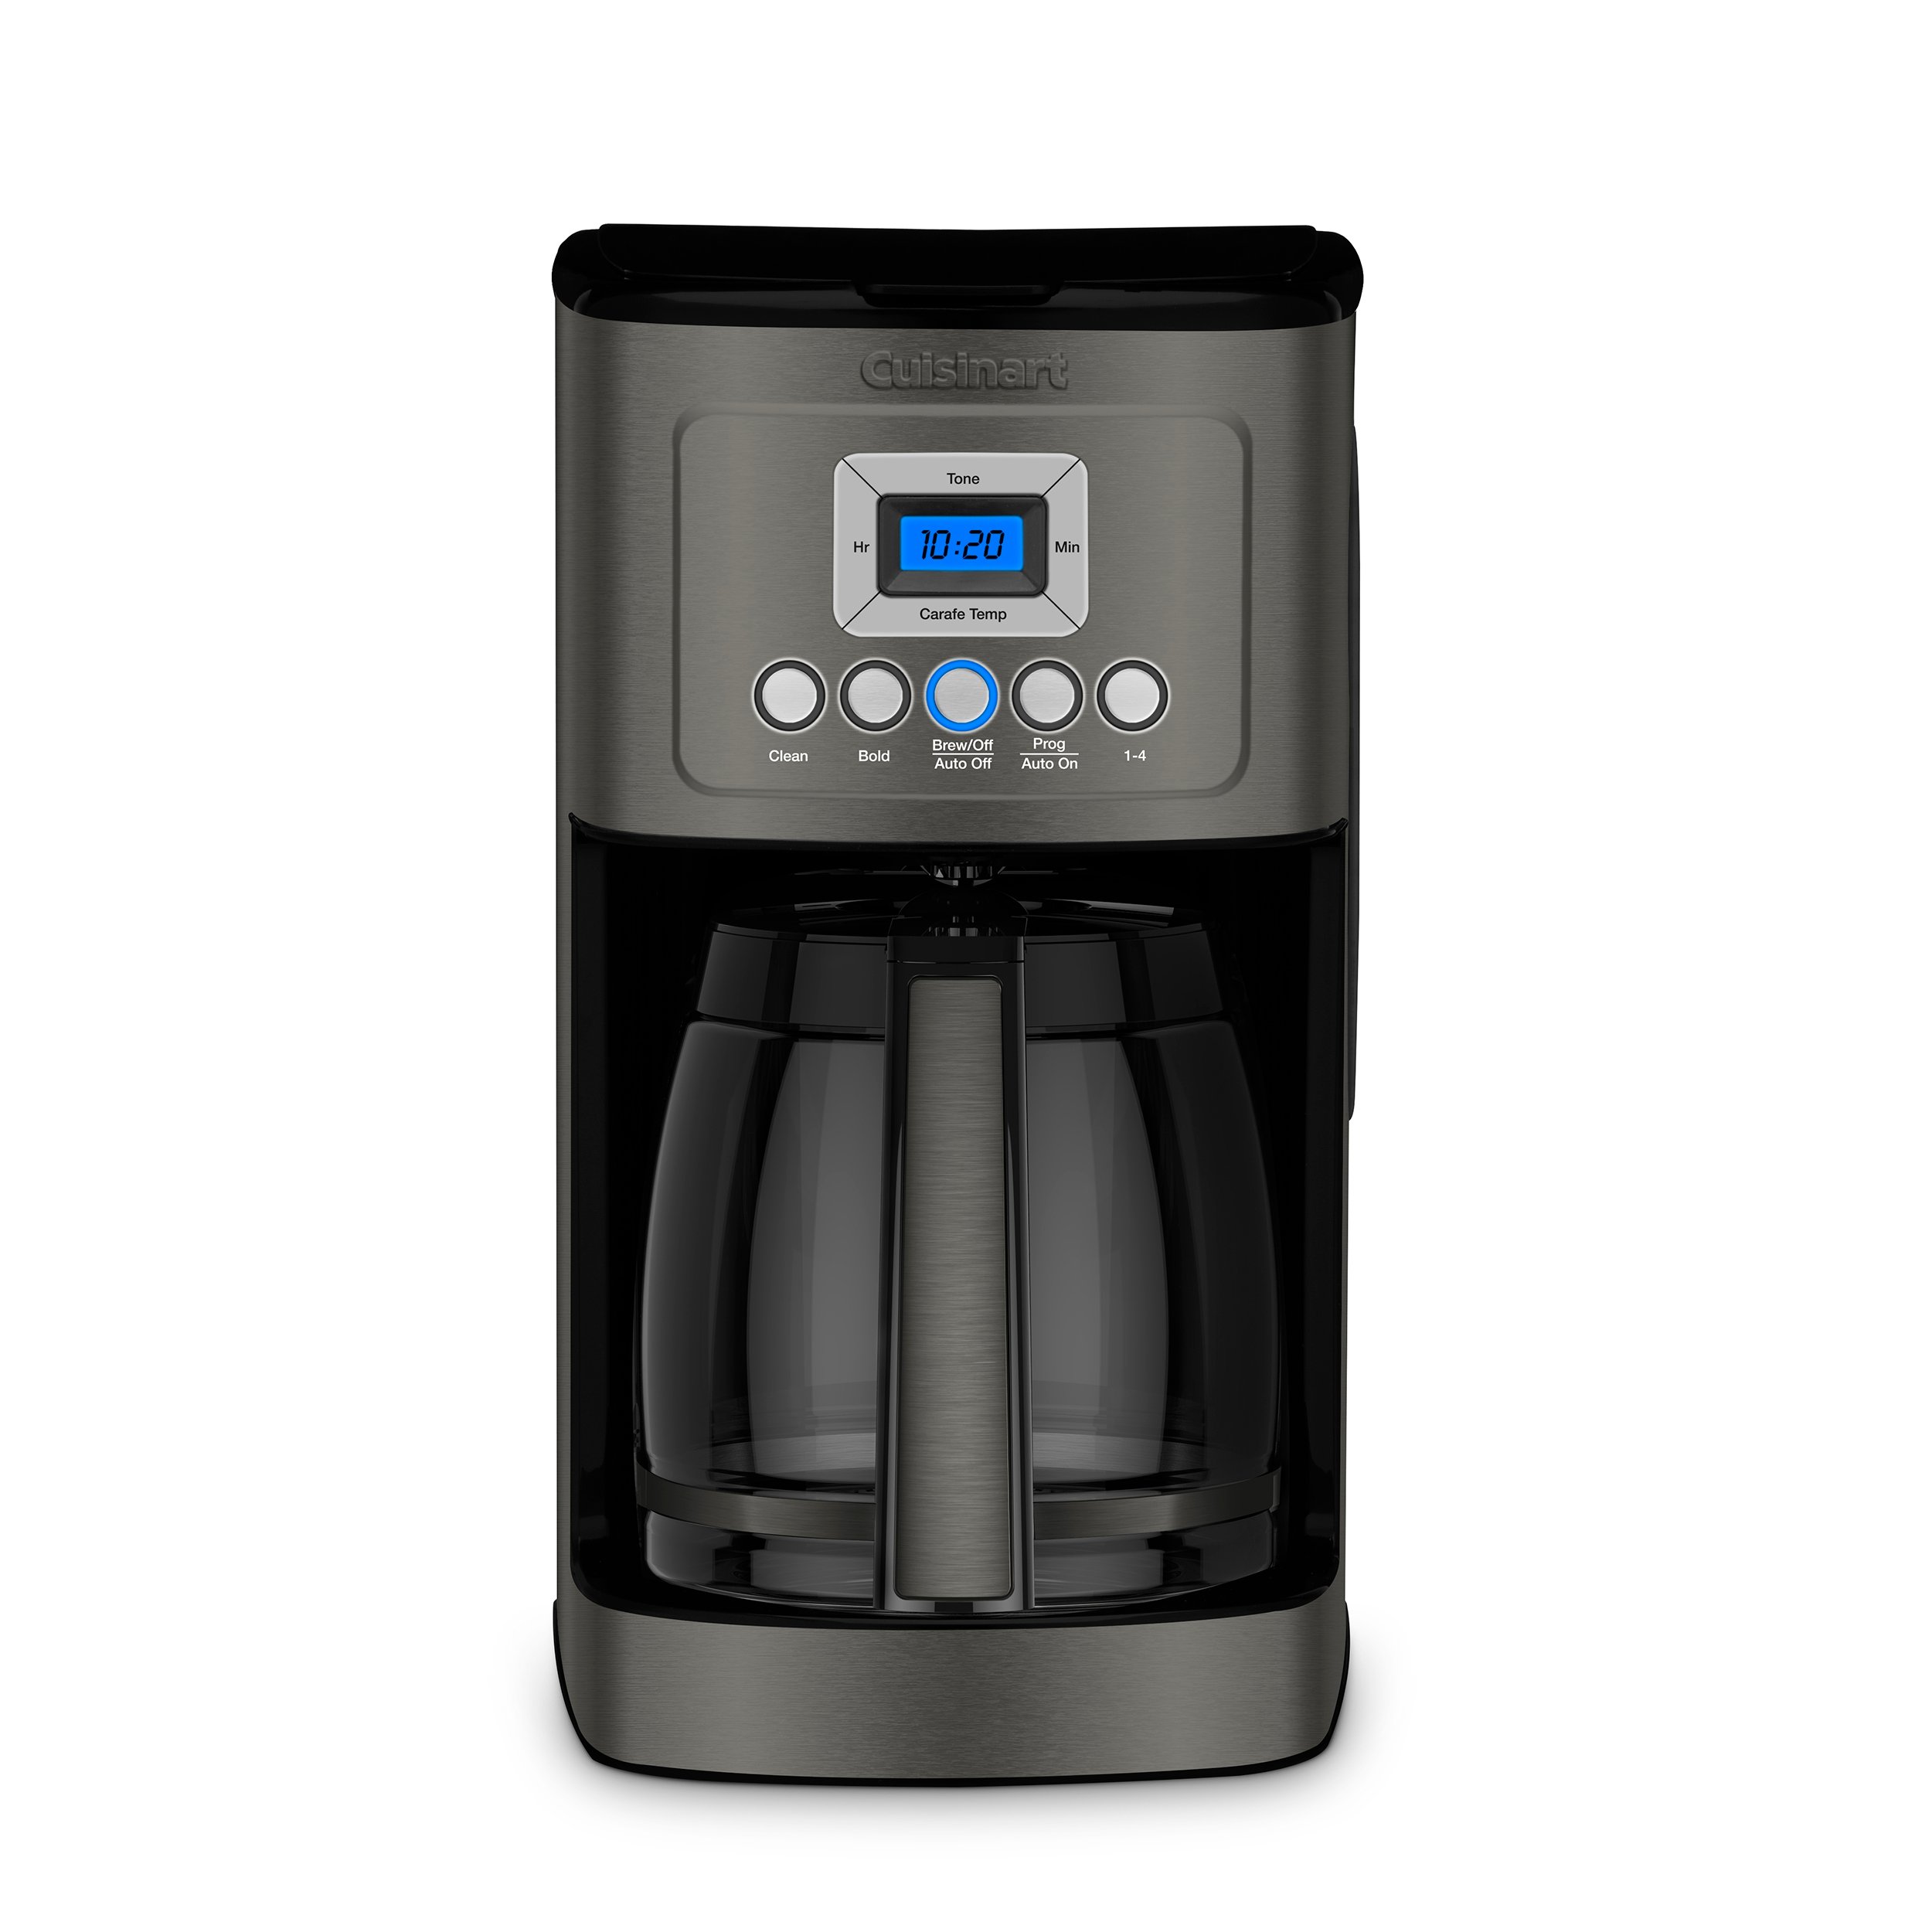 Cuisinart 14-Cup Programmable Coffeemaker Brew Hotter Coffee Black Stainless NEW 